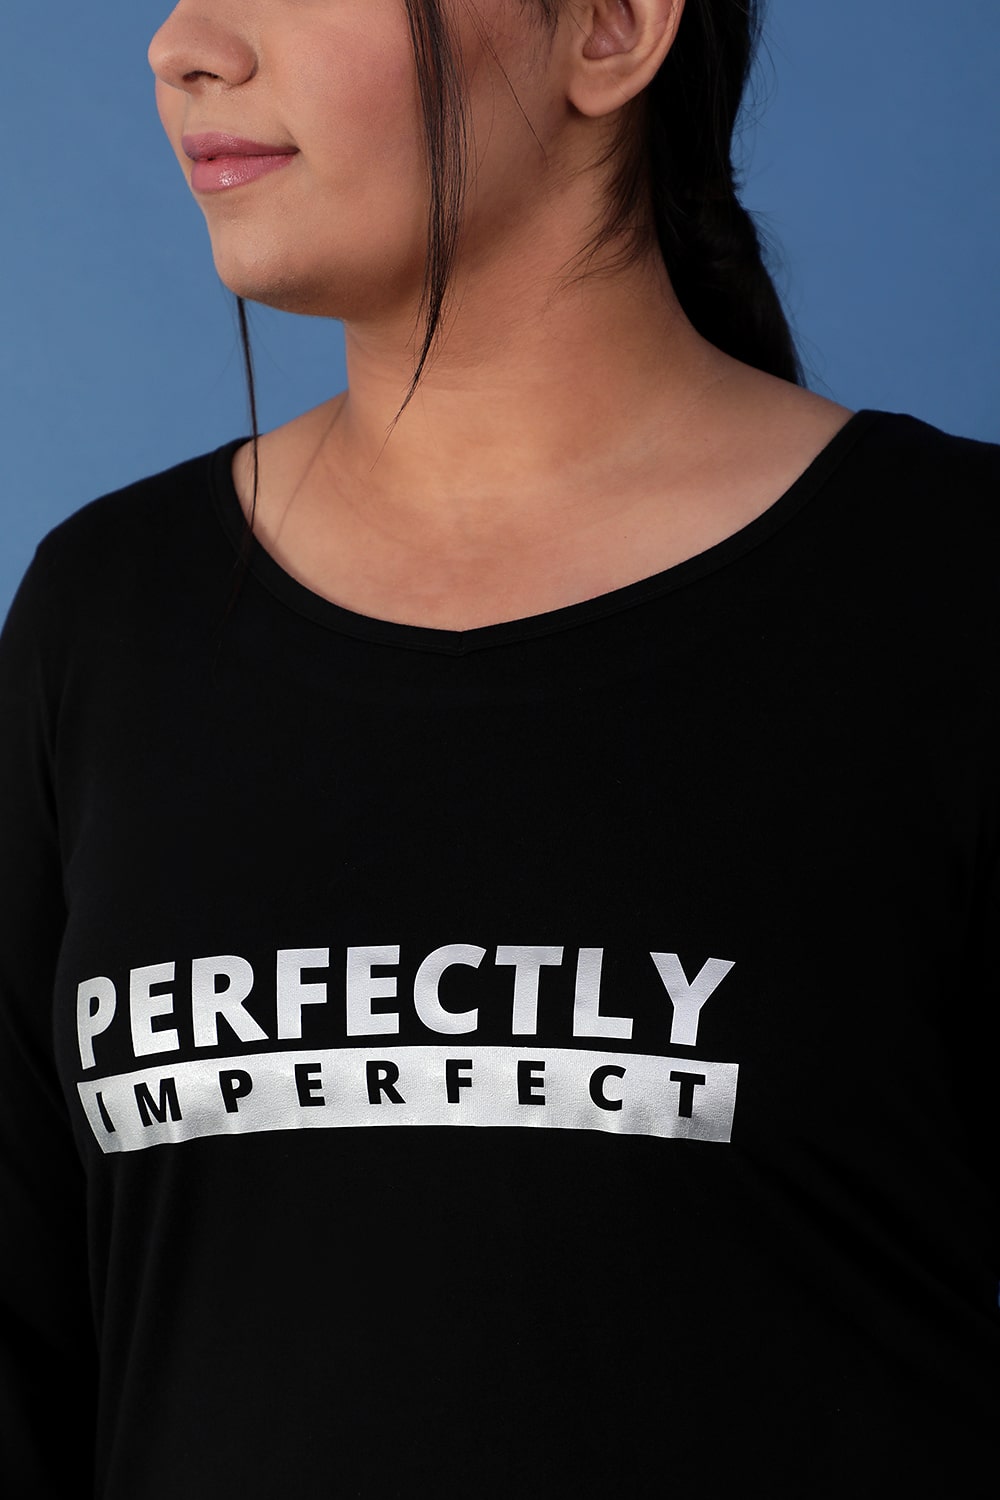 Perfectly Imperfect Black Tshirt for Women